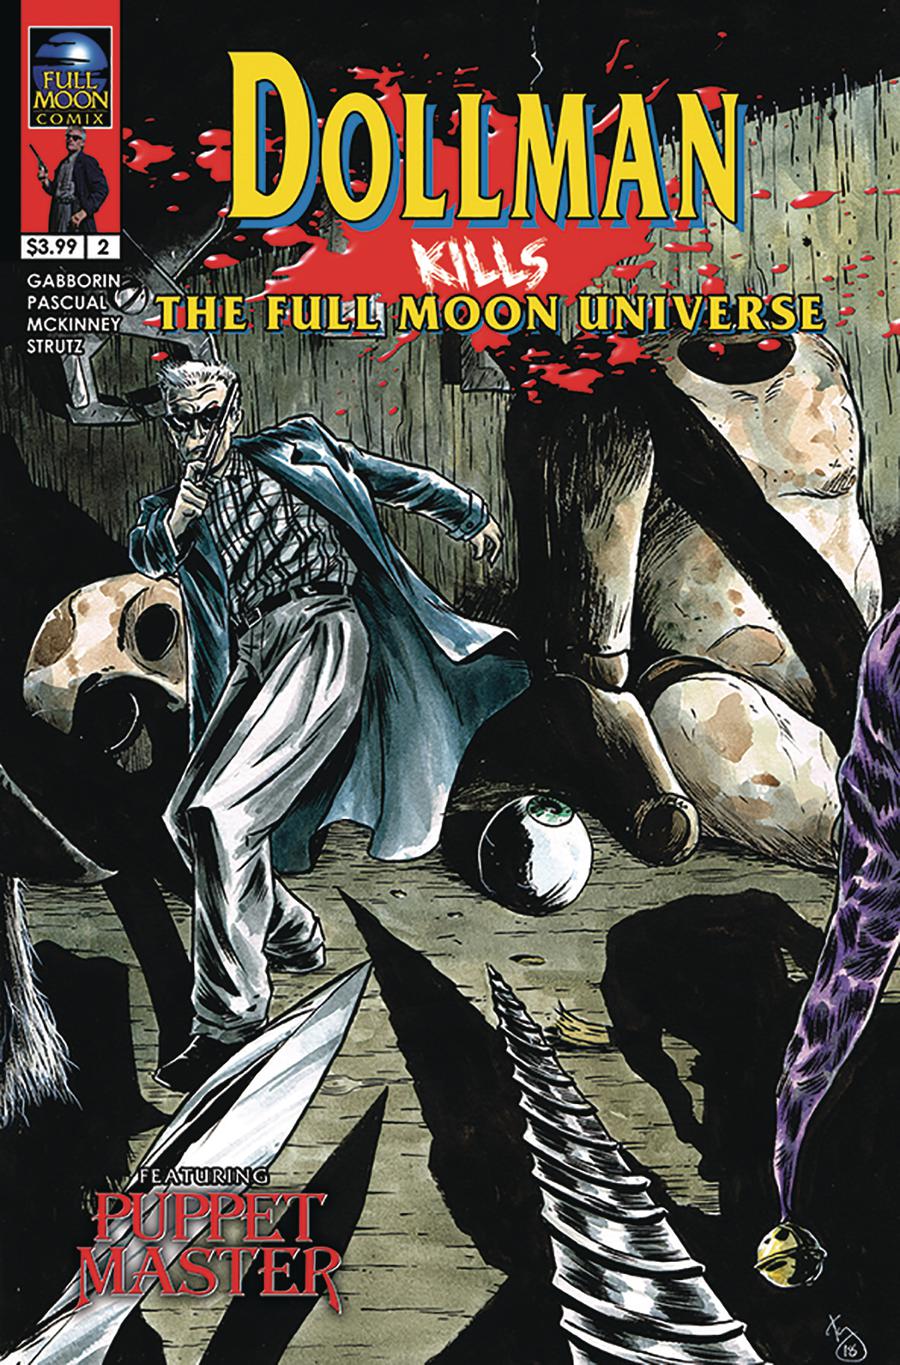 Dollman Kills The Full Moon Universe #2 Cover B Variant Kelly Williams Cover